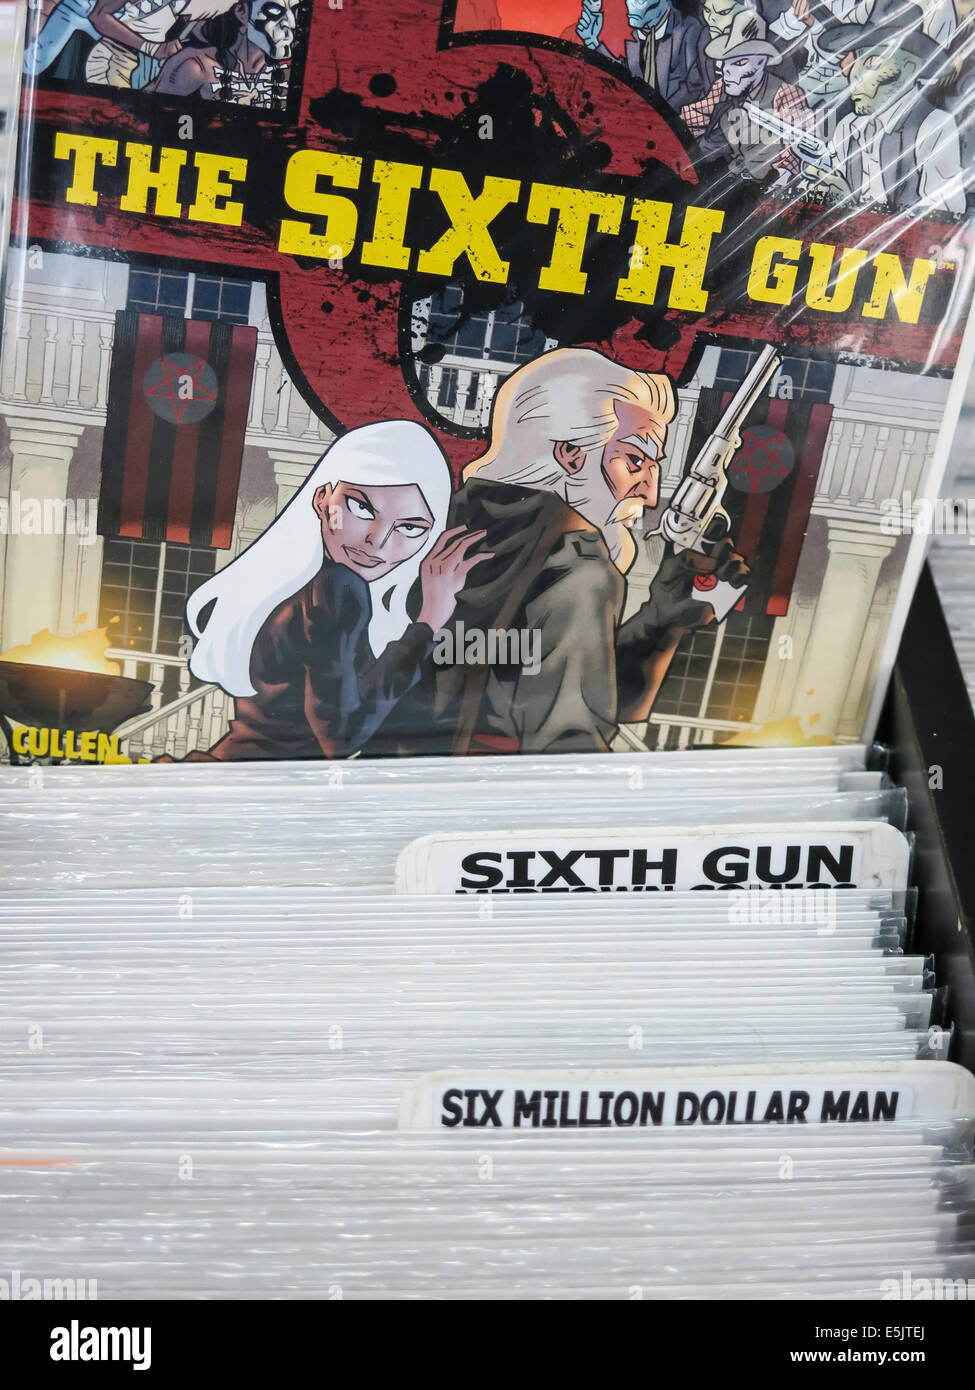 Issues of The Sixth Gun Comic Book, Midtown Comics Store, Times Square, NYC, USA Stock Photo